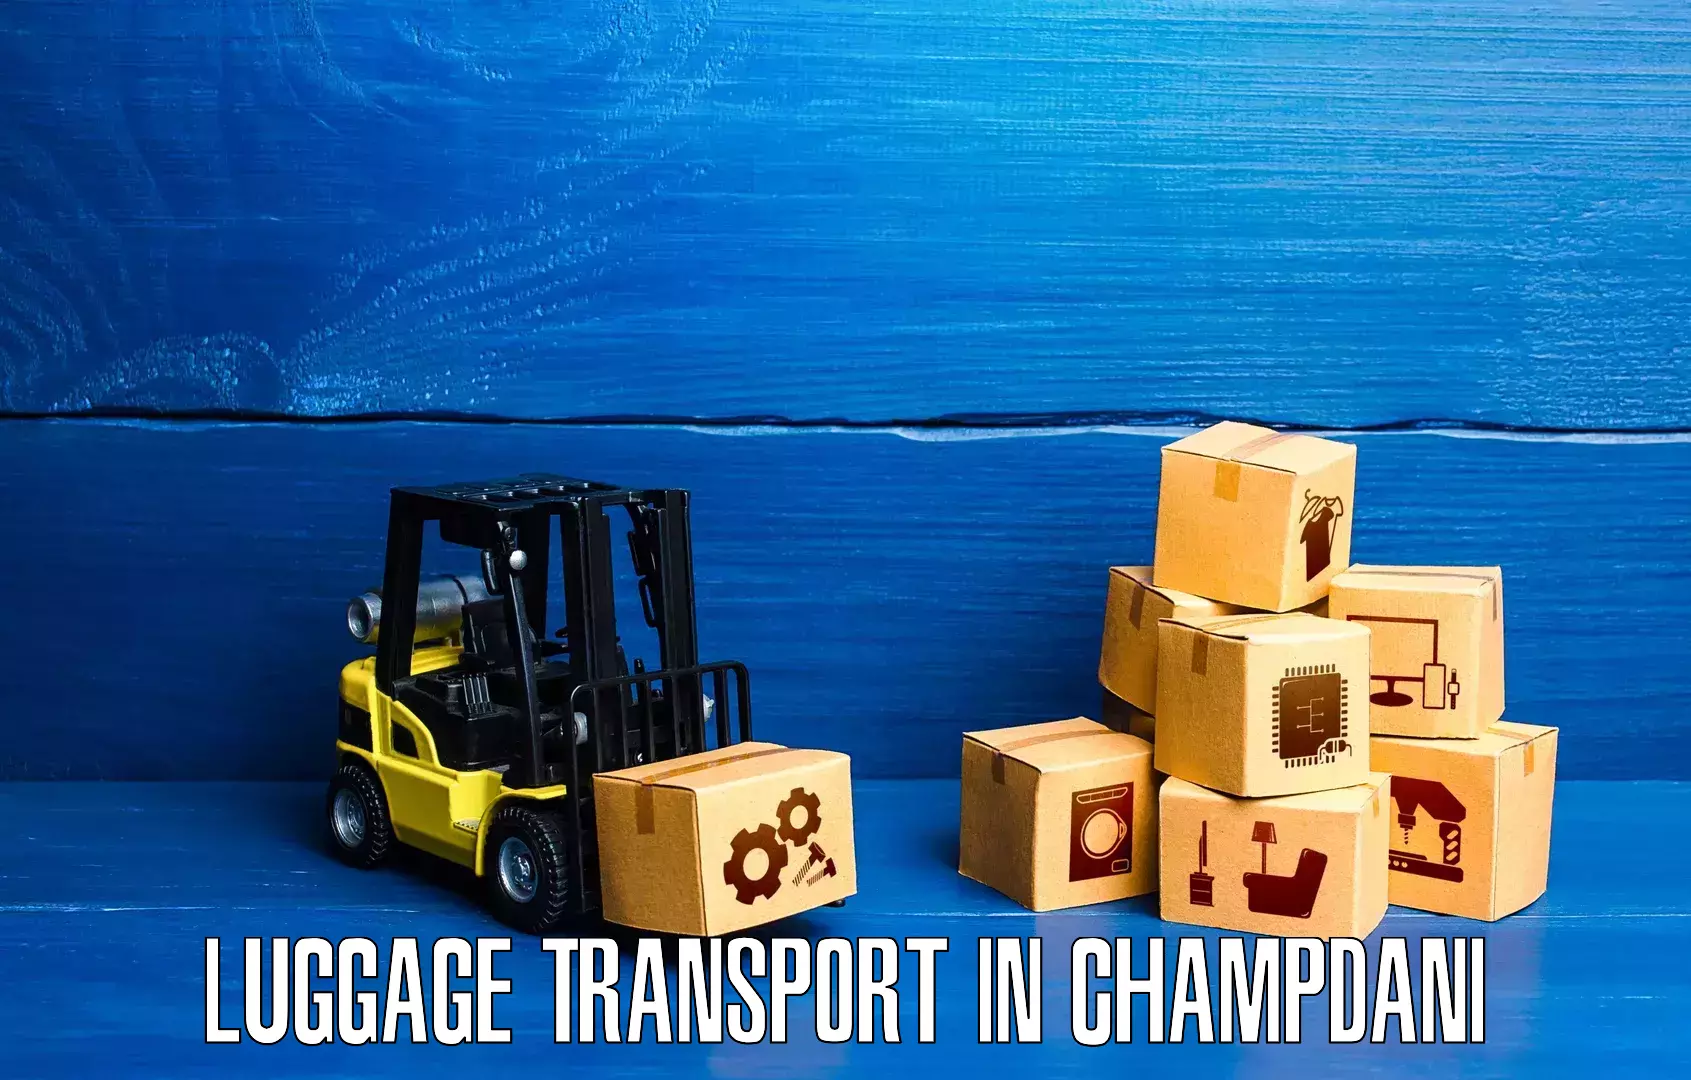 Luggage transport operations in Champdani